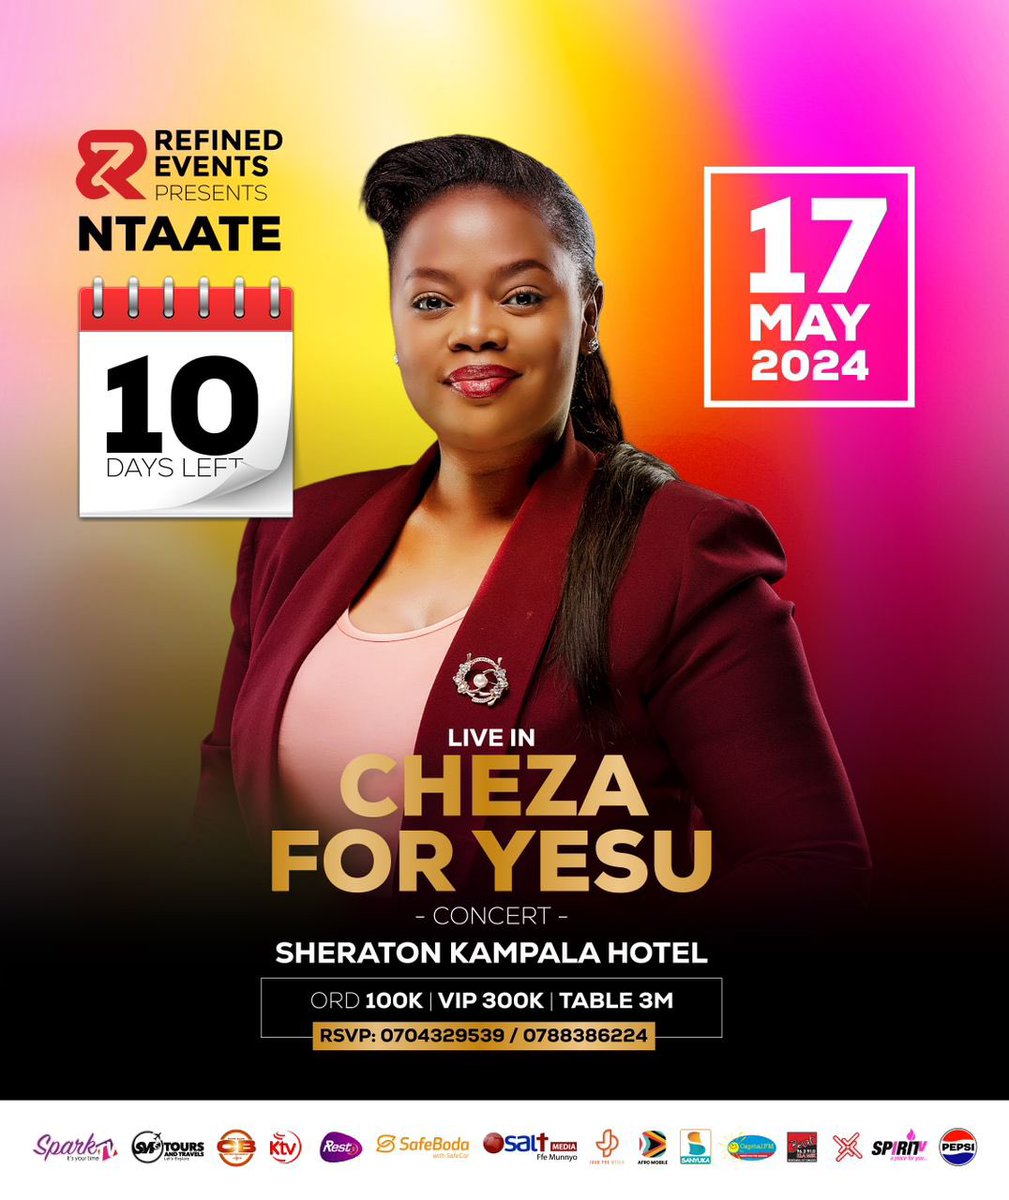 It’s now less than 2 weeks to #ChezaForYesuConcert. Go secure that ticket to one of the biggest events this year. 

Tickets go for as low as 100k ordinary and you can purchase from @kampalaserena Hotel, worship House Nansana, Sparkles saloon among others.